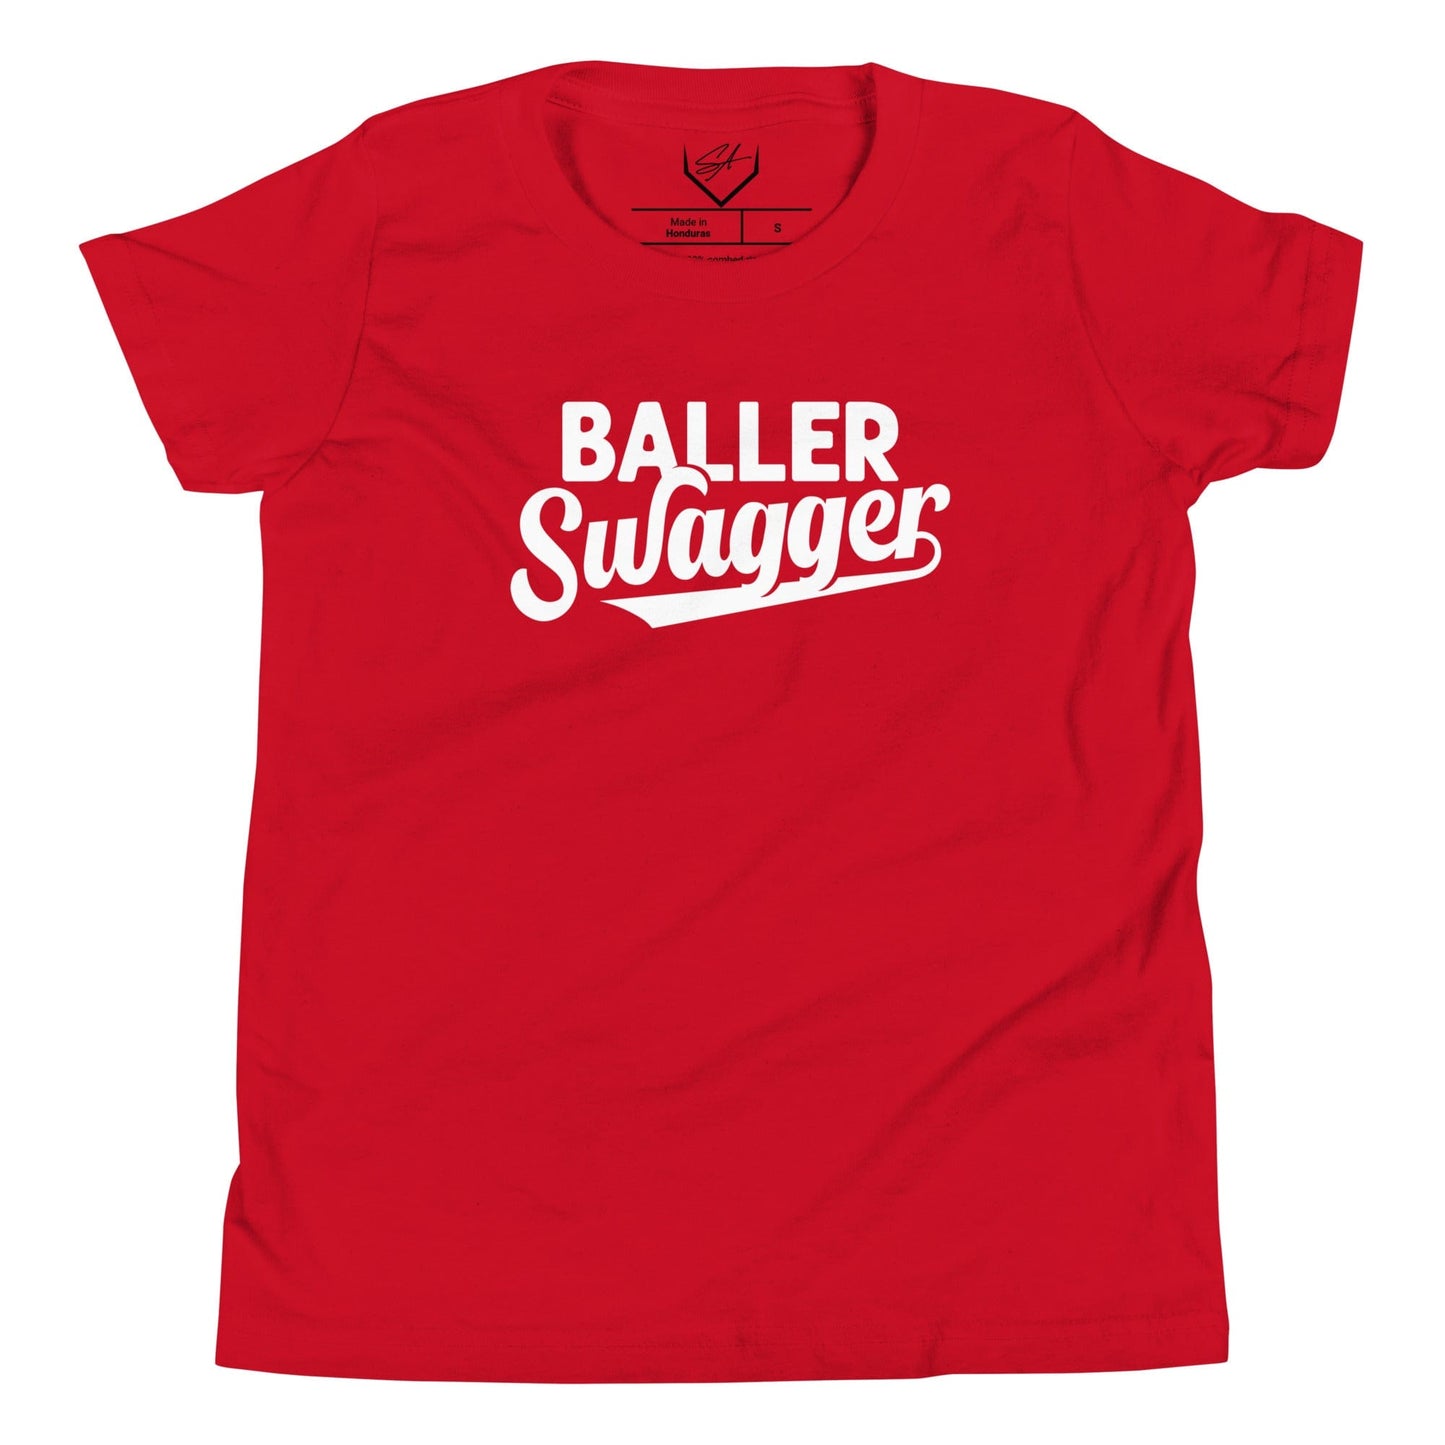 Baller Swagger - Youth Tee